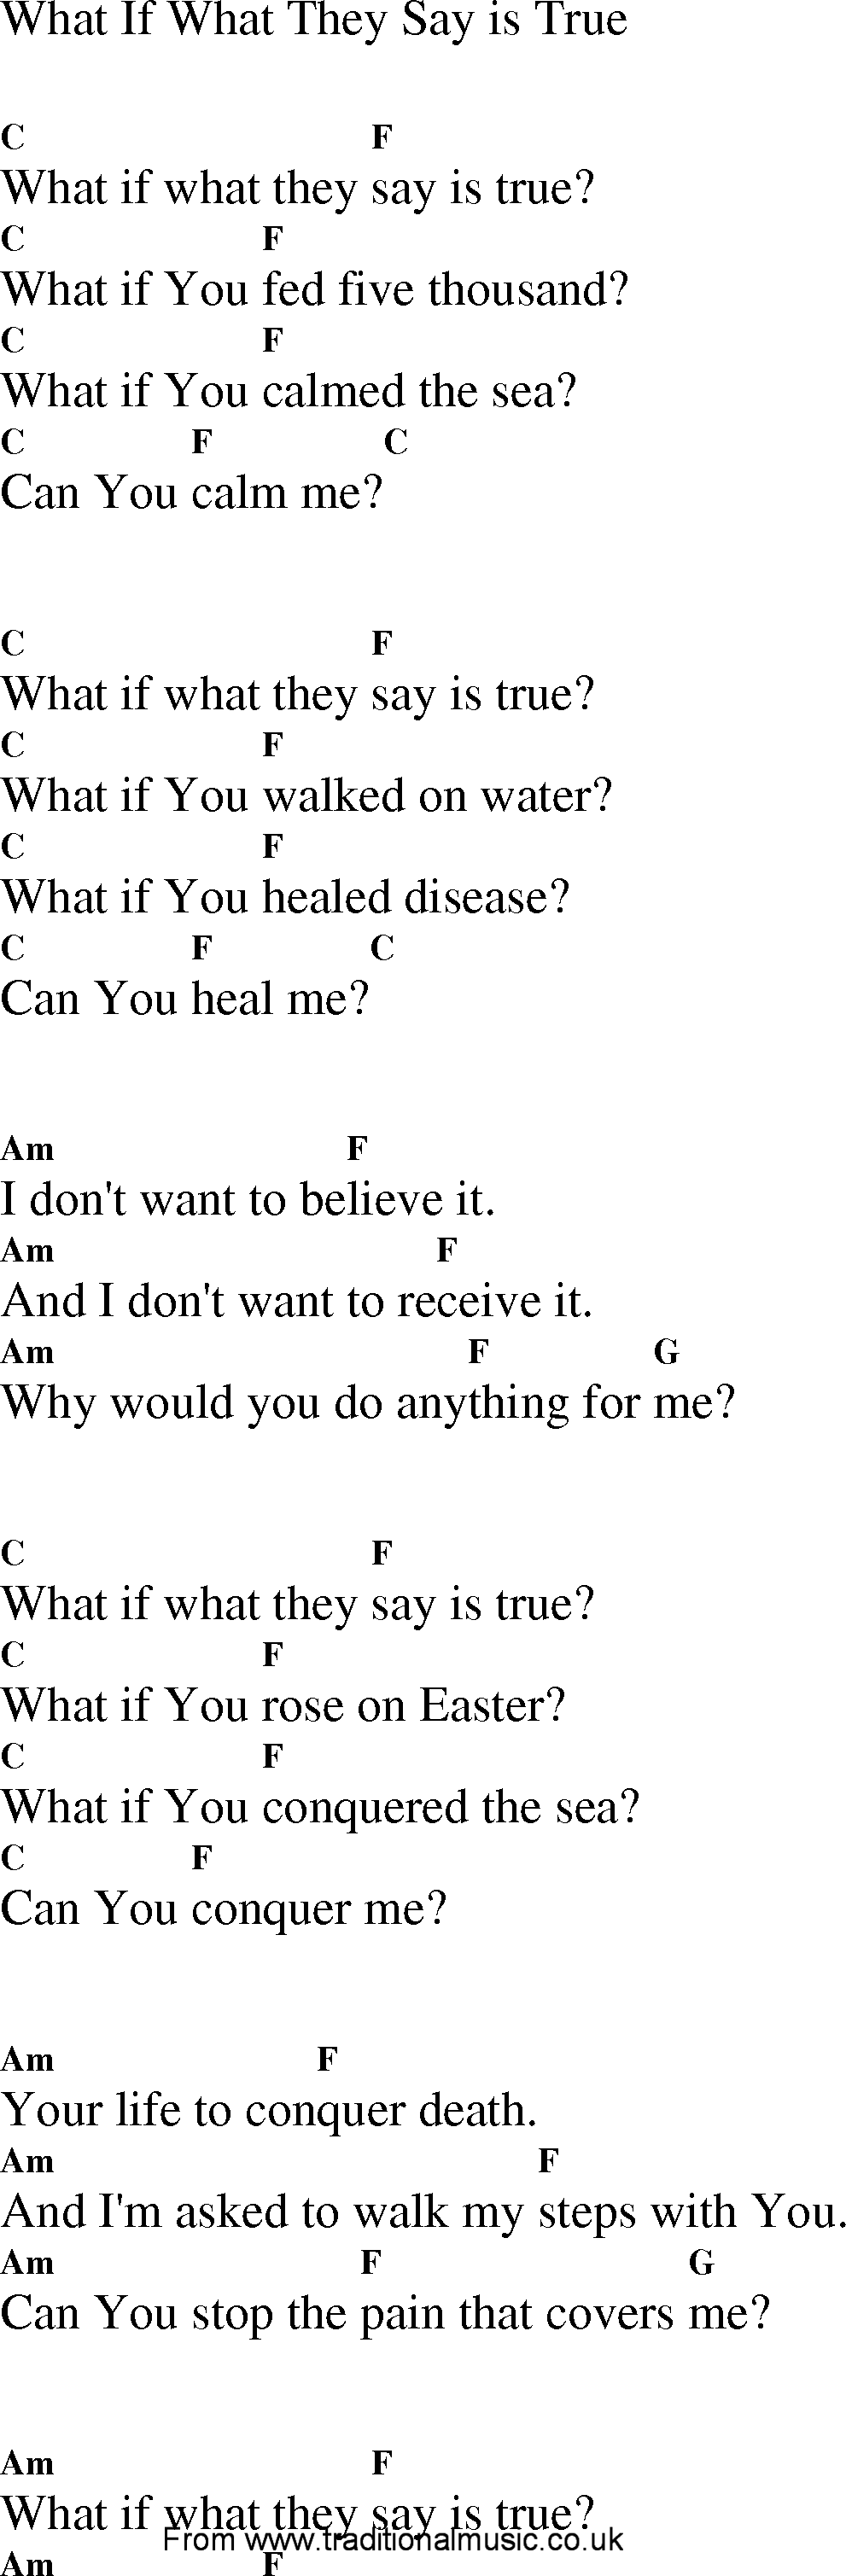 Gospel Song: what_if_what_they_say_is_true, lyrics and chords.